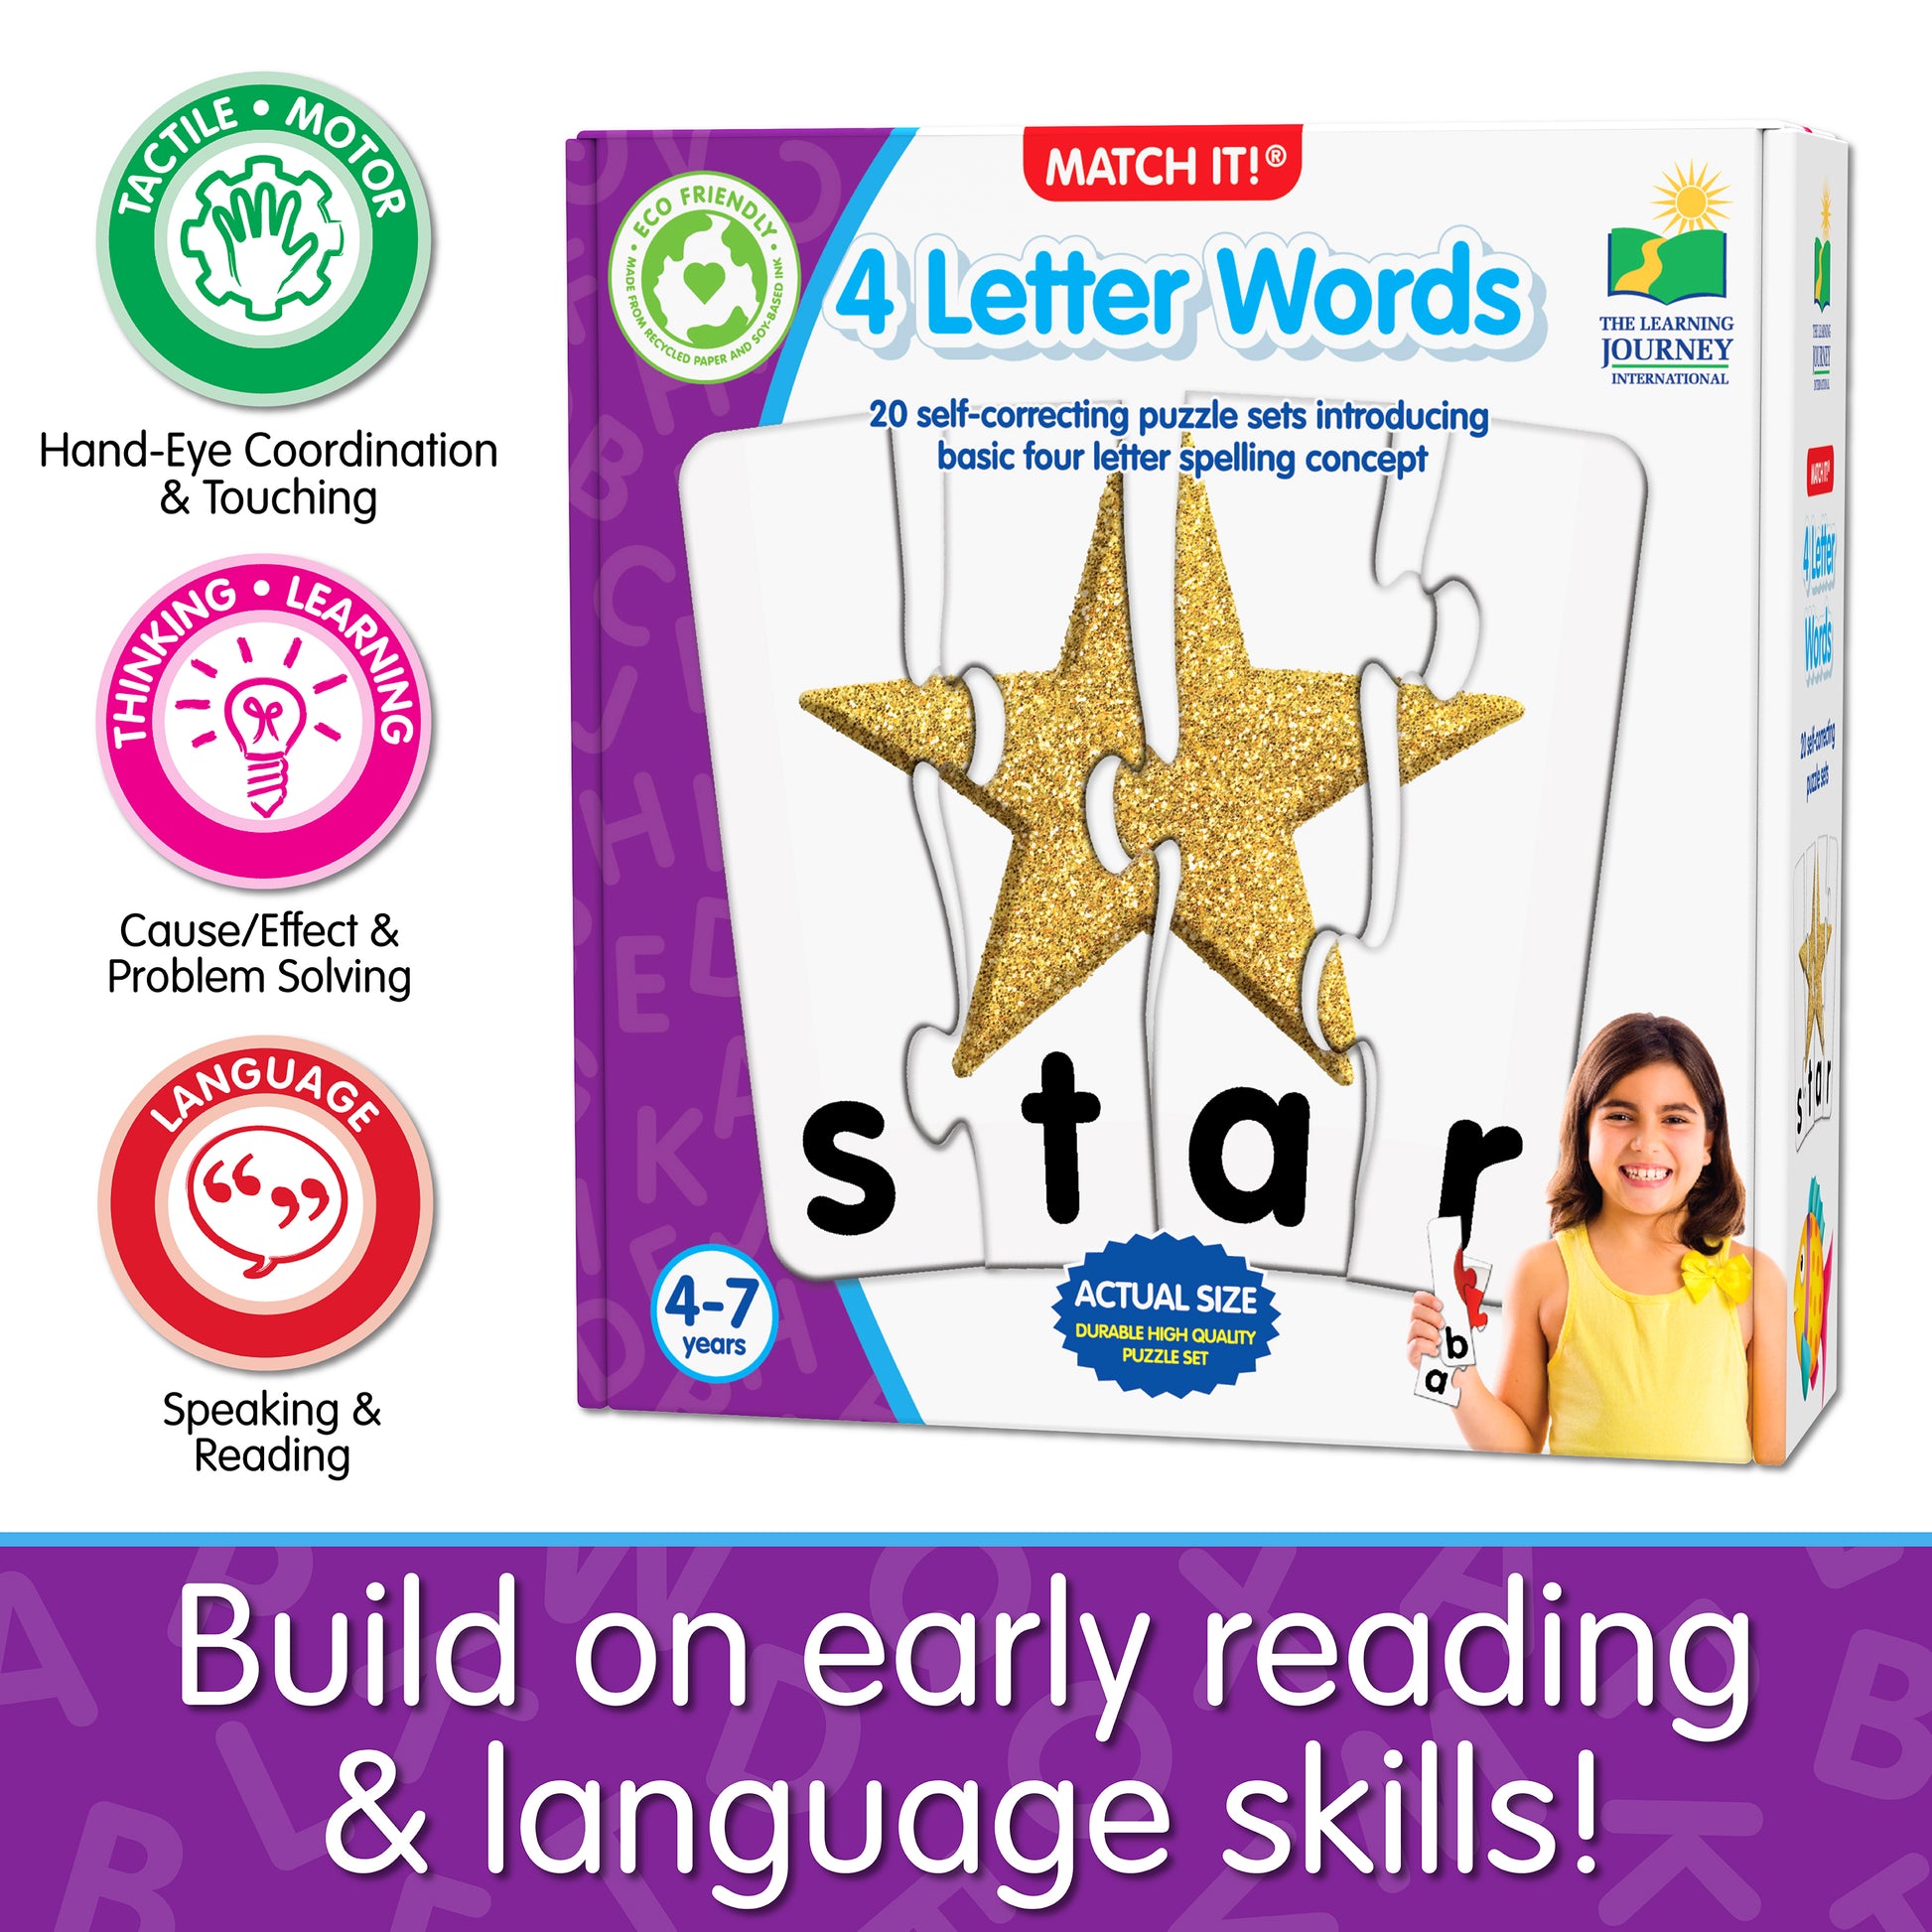 Infographic about Match It - 4 Letter Words' educational benefits that says, "Build on early reading and language skills!"